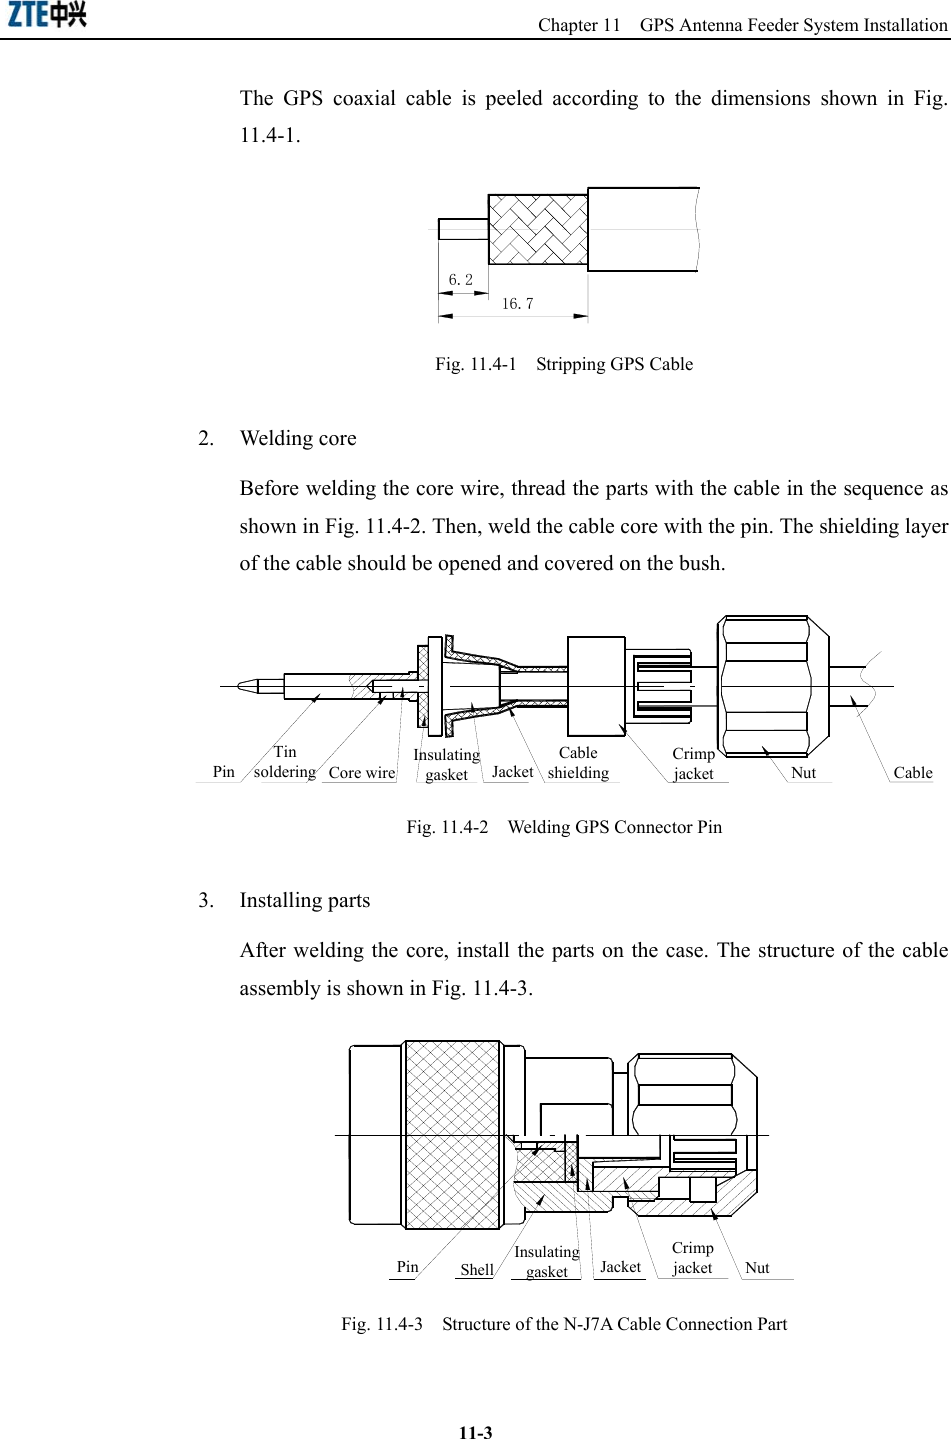                                                 Chapter 11  GPS Antenna Feeder System Installation  11-3The GPS coaxial cable is peeled according to the dimensions shown in Fig. 11.4-1. 6.216.7  Fig. 11.4-1    Stripping GPS Cable 2. Welding core Before welding the core wire, thread the parts with the cable in the sequence as shown in Fig. 11.4-2. Then, weld the cable core with the pin. The shielding layer of the cable should be opened and covered on the bush. PinInsulating gasketCable shieldingJacketCrimp jacket Nut CableCore wire Tin soldering  Fig. 11.4-2    Welding GPS Connector Pin   3. Installing parts After welding the core, install the parts on the case. The structure of the cable assembly is shown in Fig. 11.4-3. Insulating gasket JacketCrimp jacketShell NutPin  Fig. 11.4-3    Structure of the N-J7A Cable Connection Part   